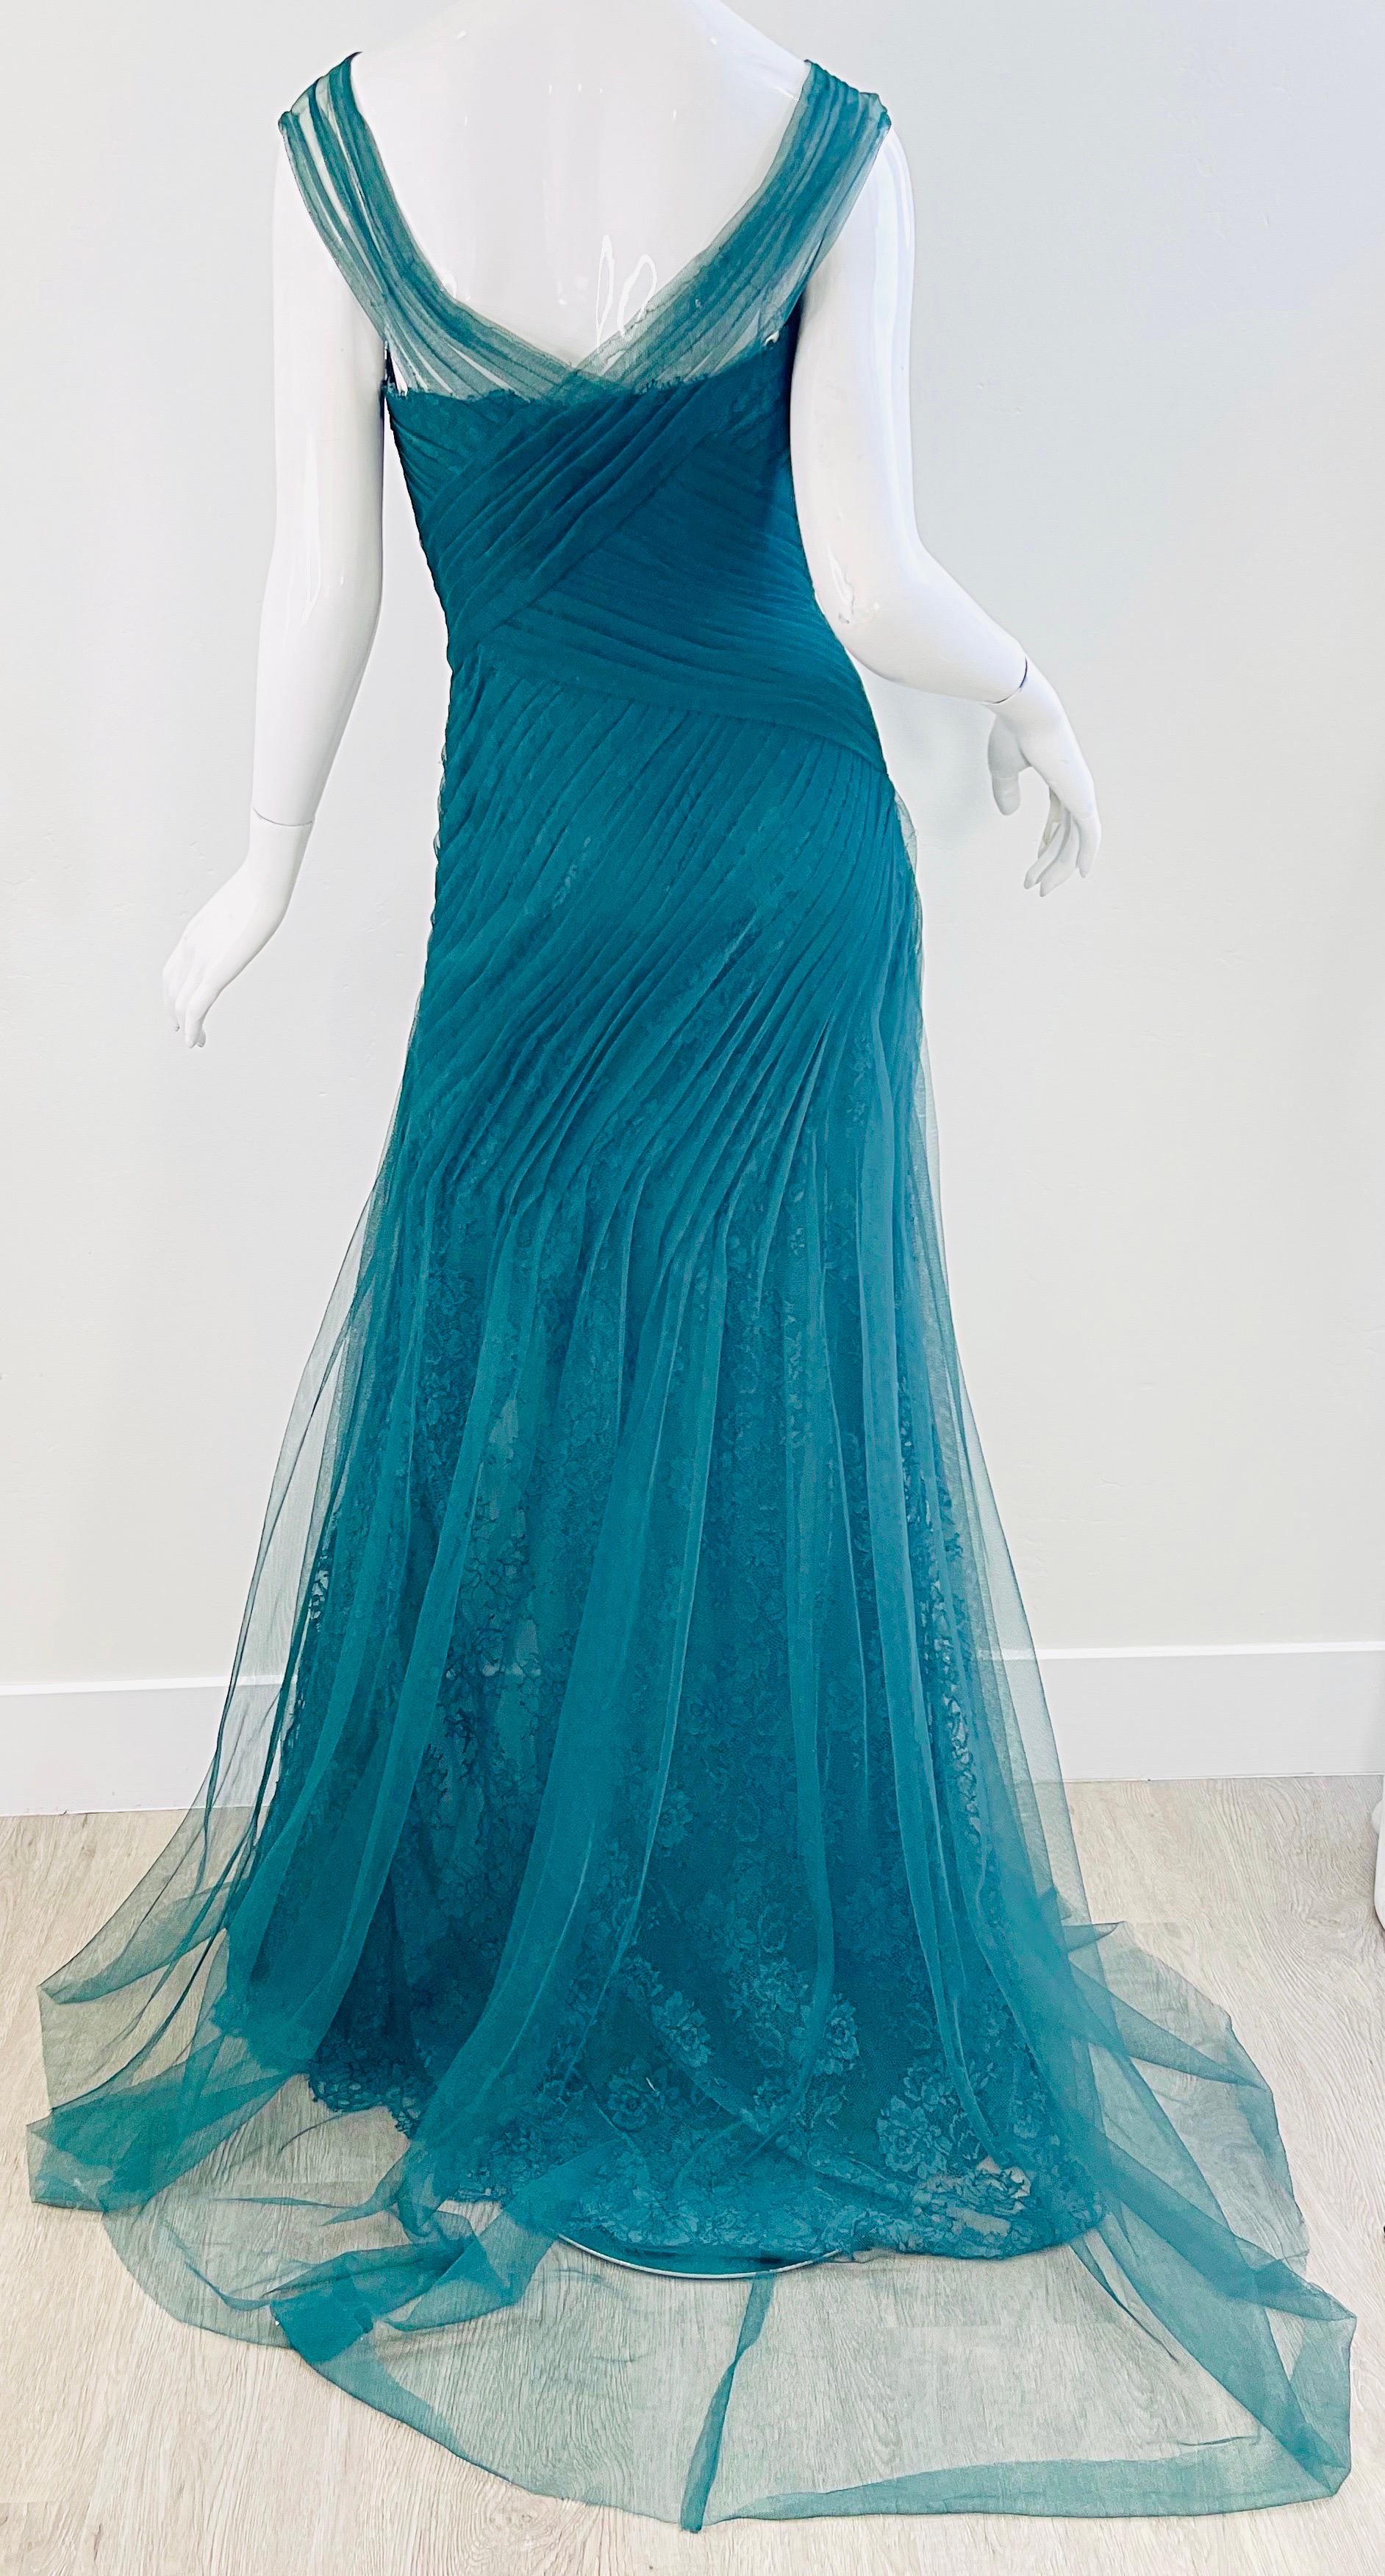 NWT Monique Lhuillier Runway Spring 2013 Size 4 Emerald Green Lace Gown Dress For Sale 5